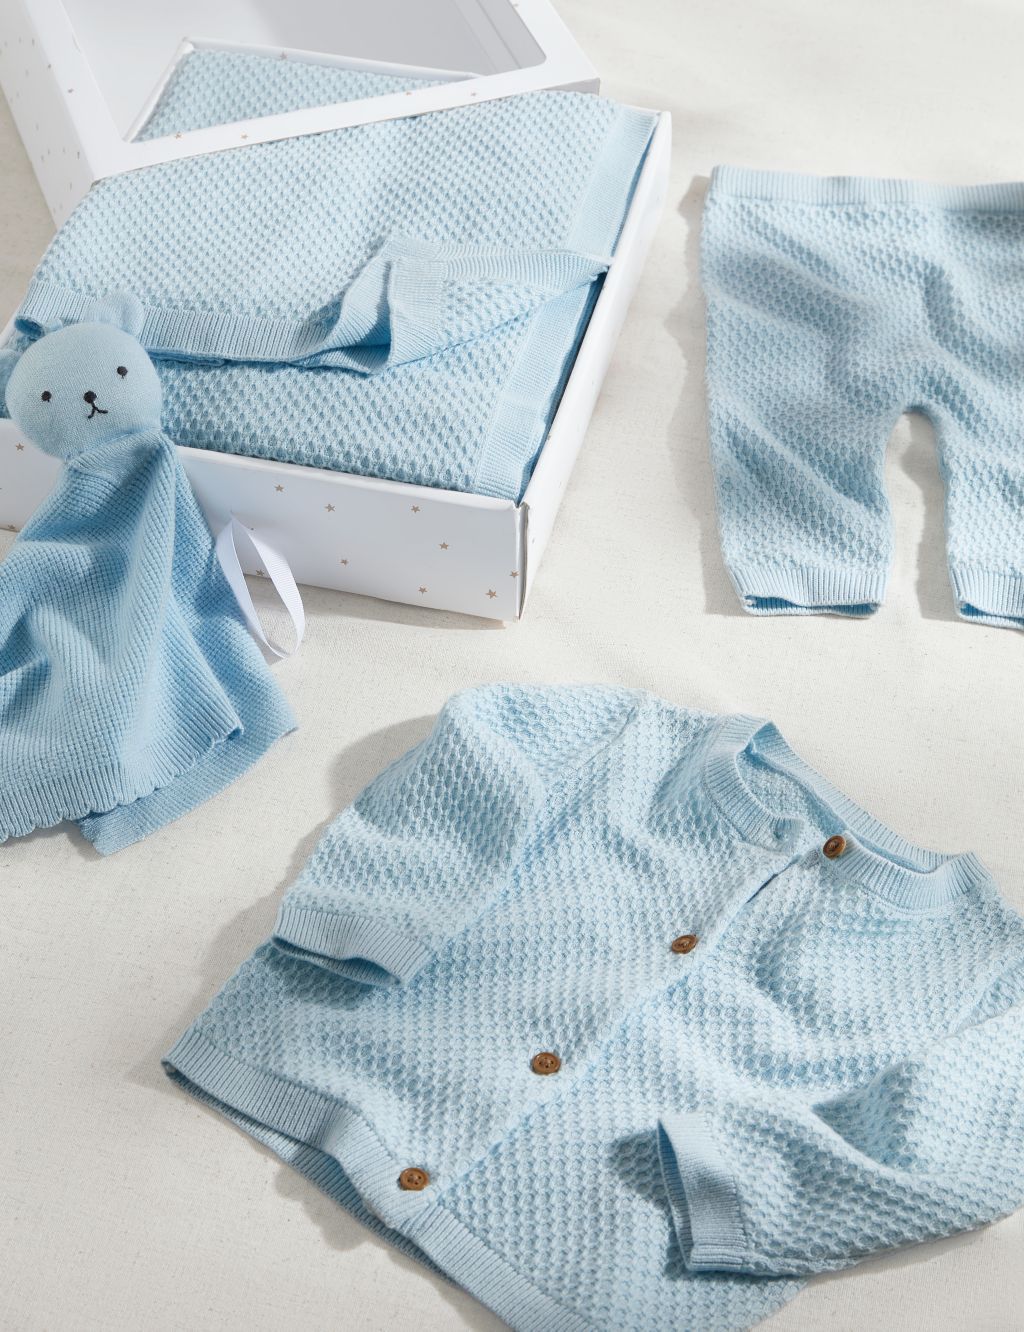 4pc Knitted Gift Set (0-6 Mths)